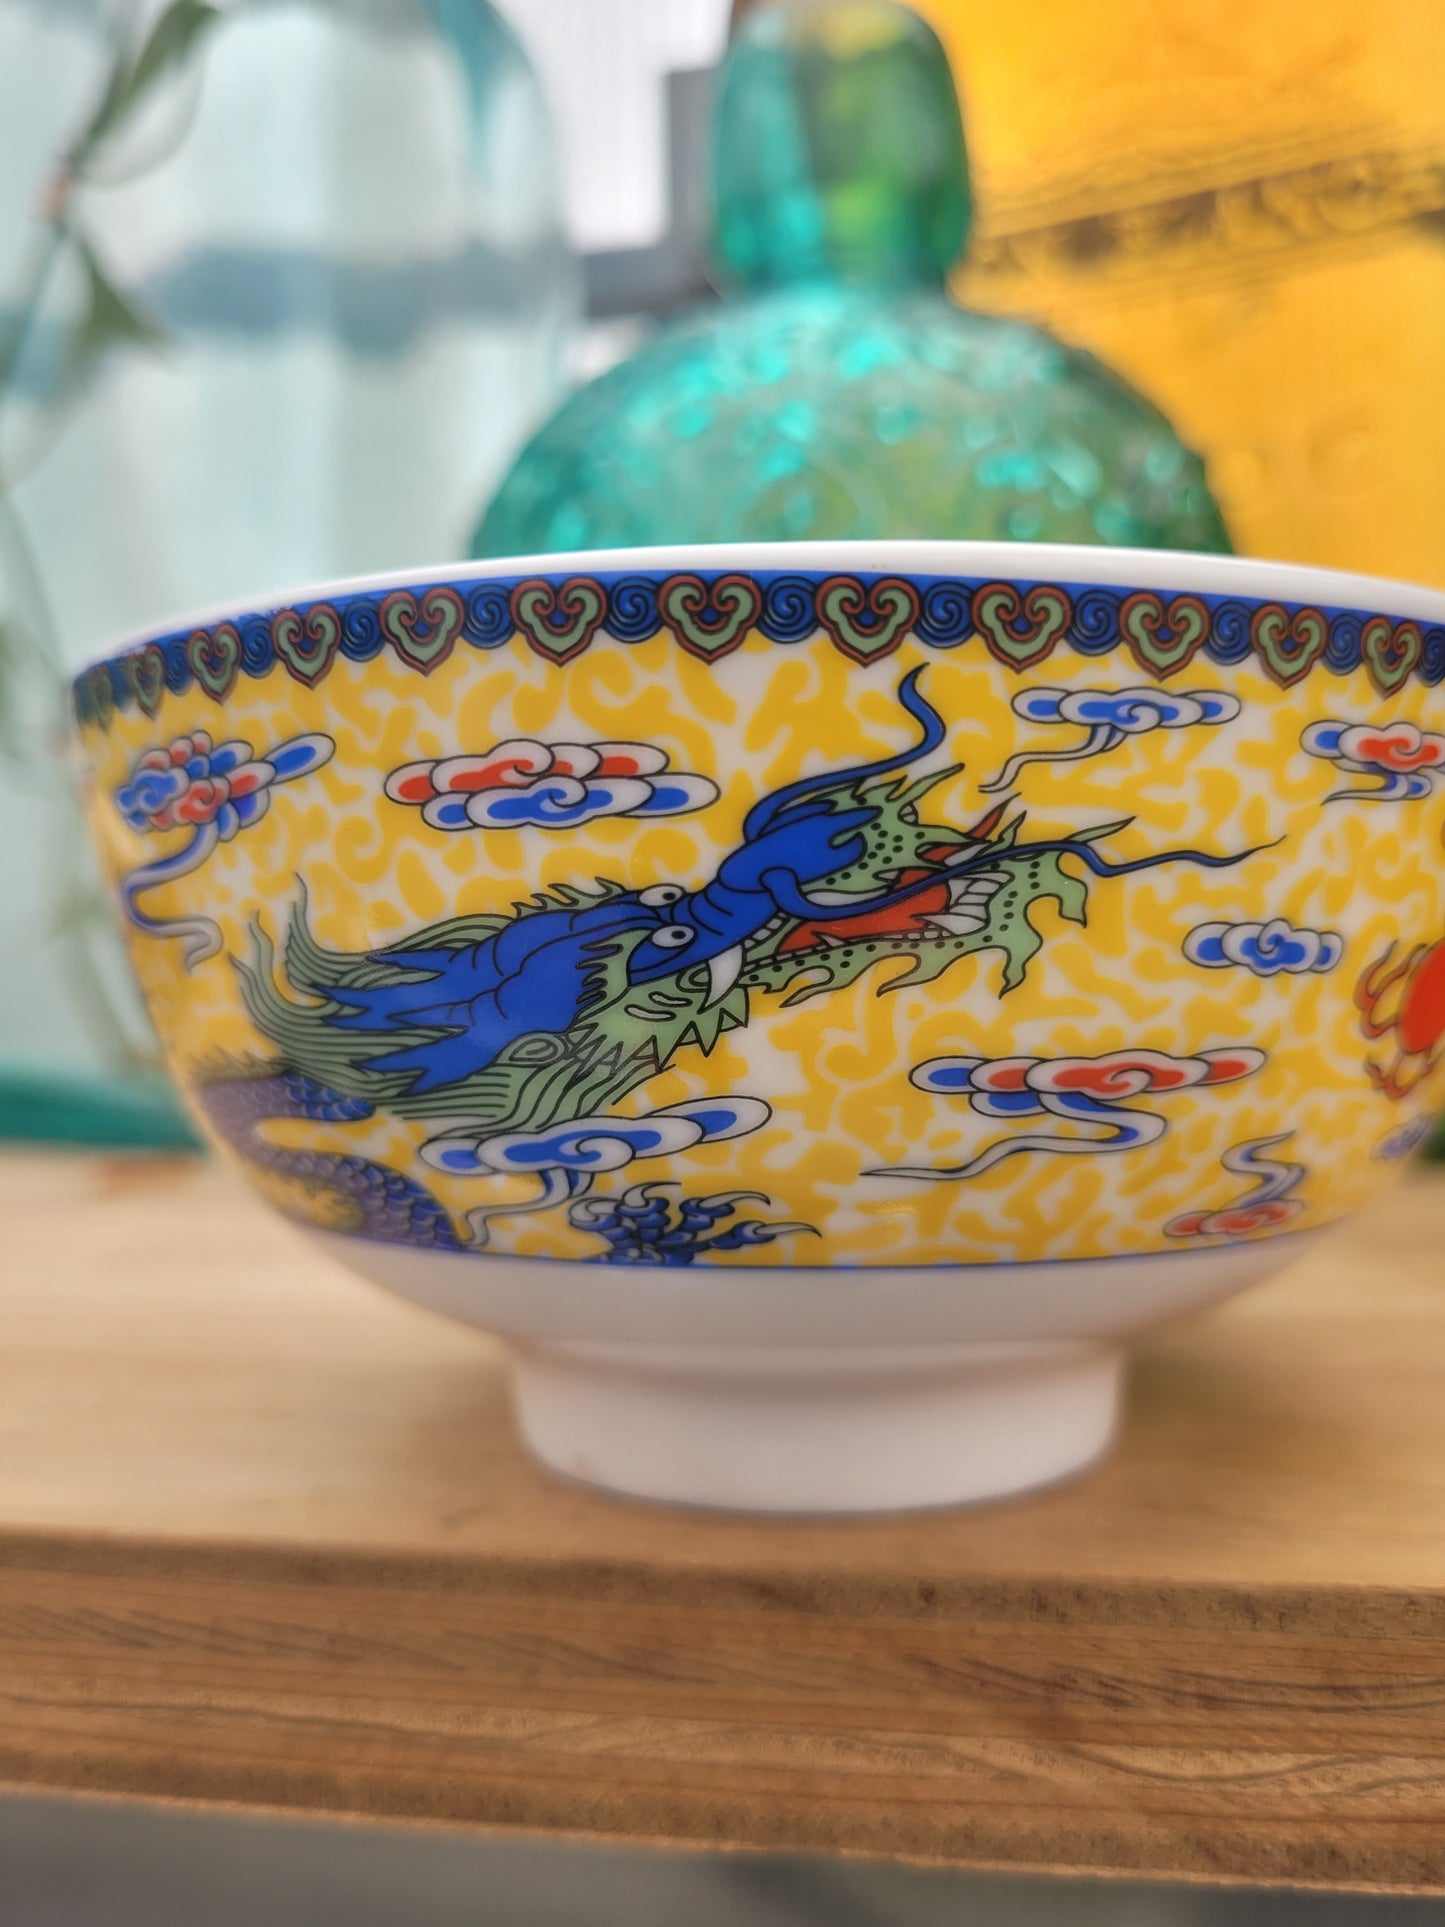 The Year of the Dragon Bowl